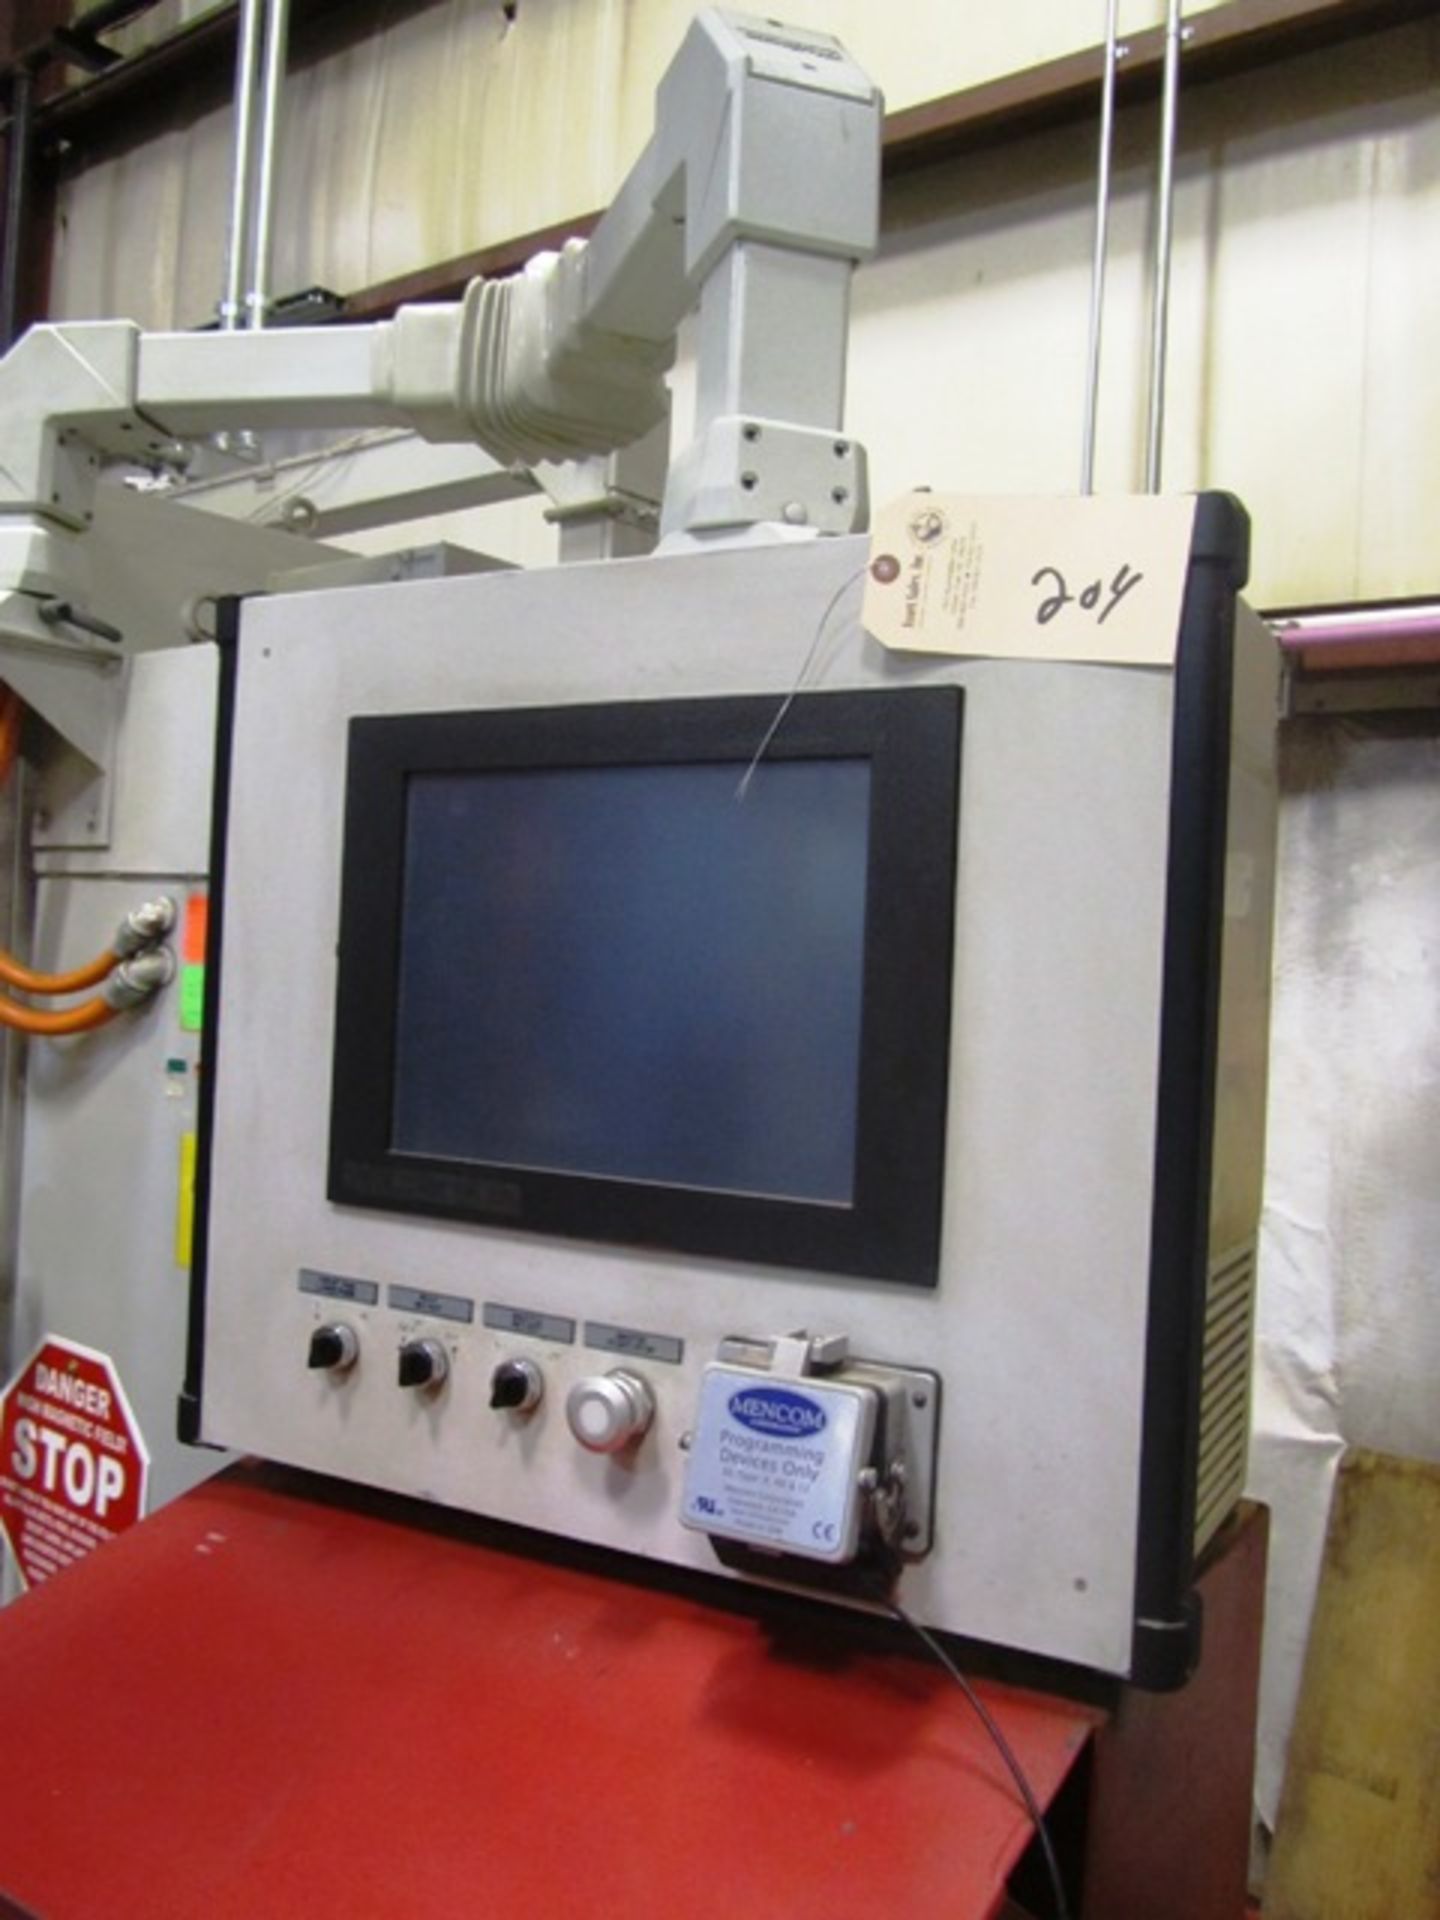 Ajax Tocco Model Pacer T 250kva Induction Heating Unit - Image 2 of 4